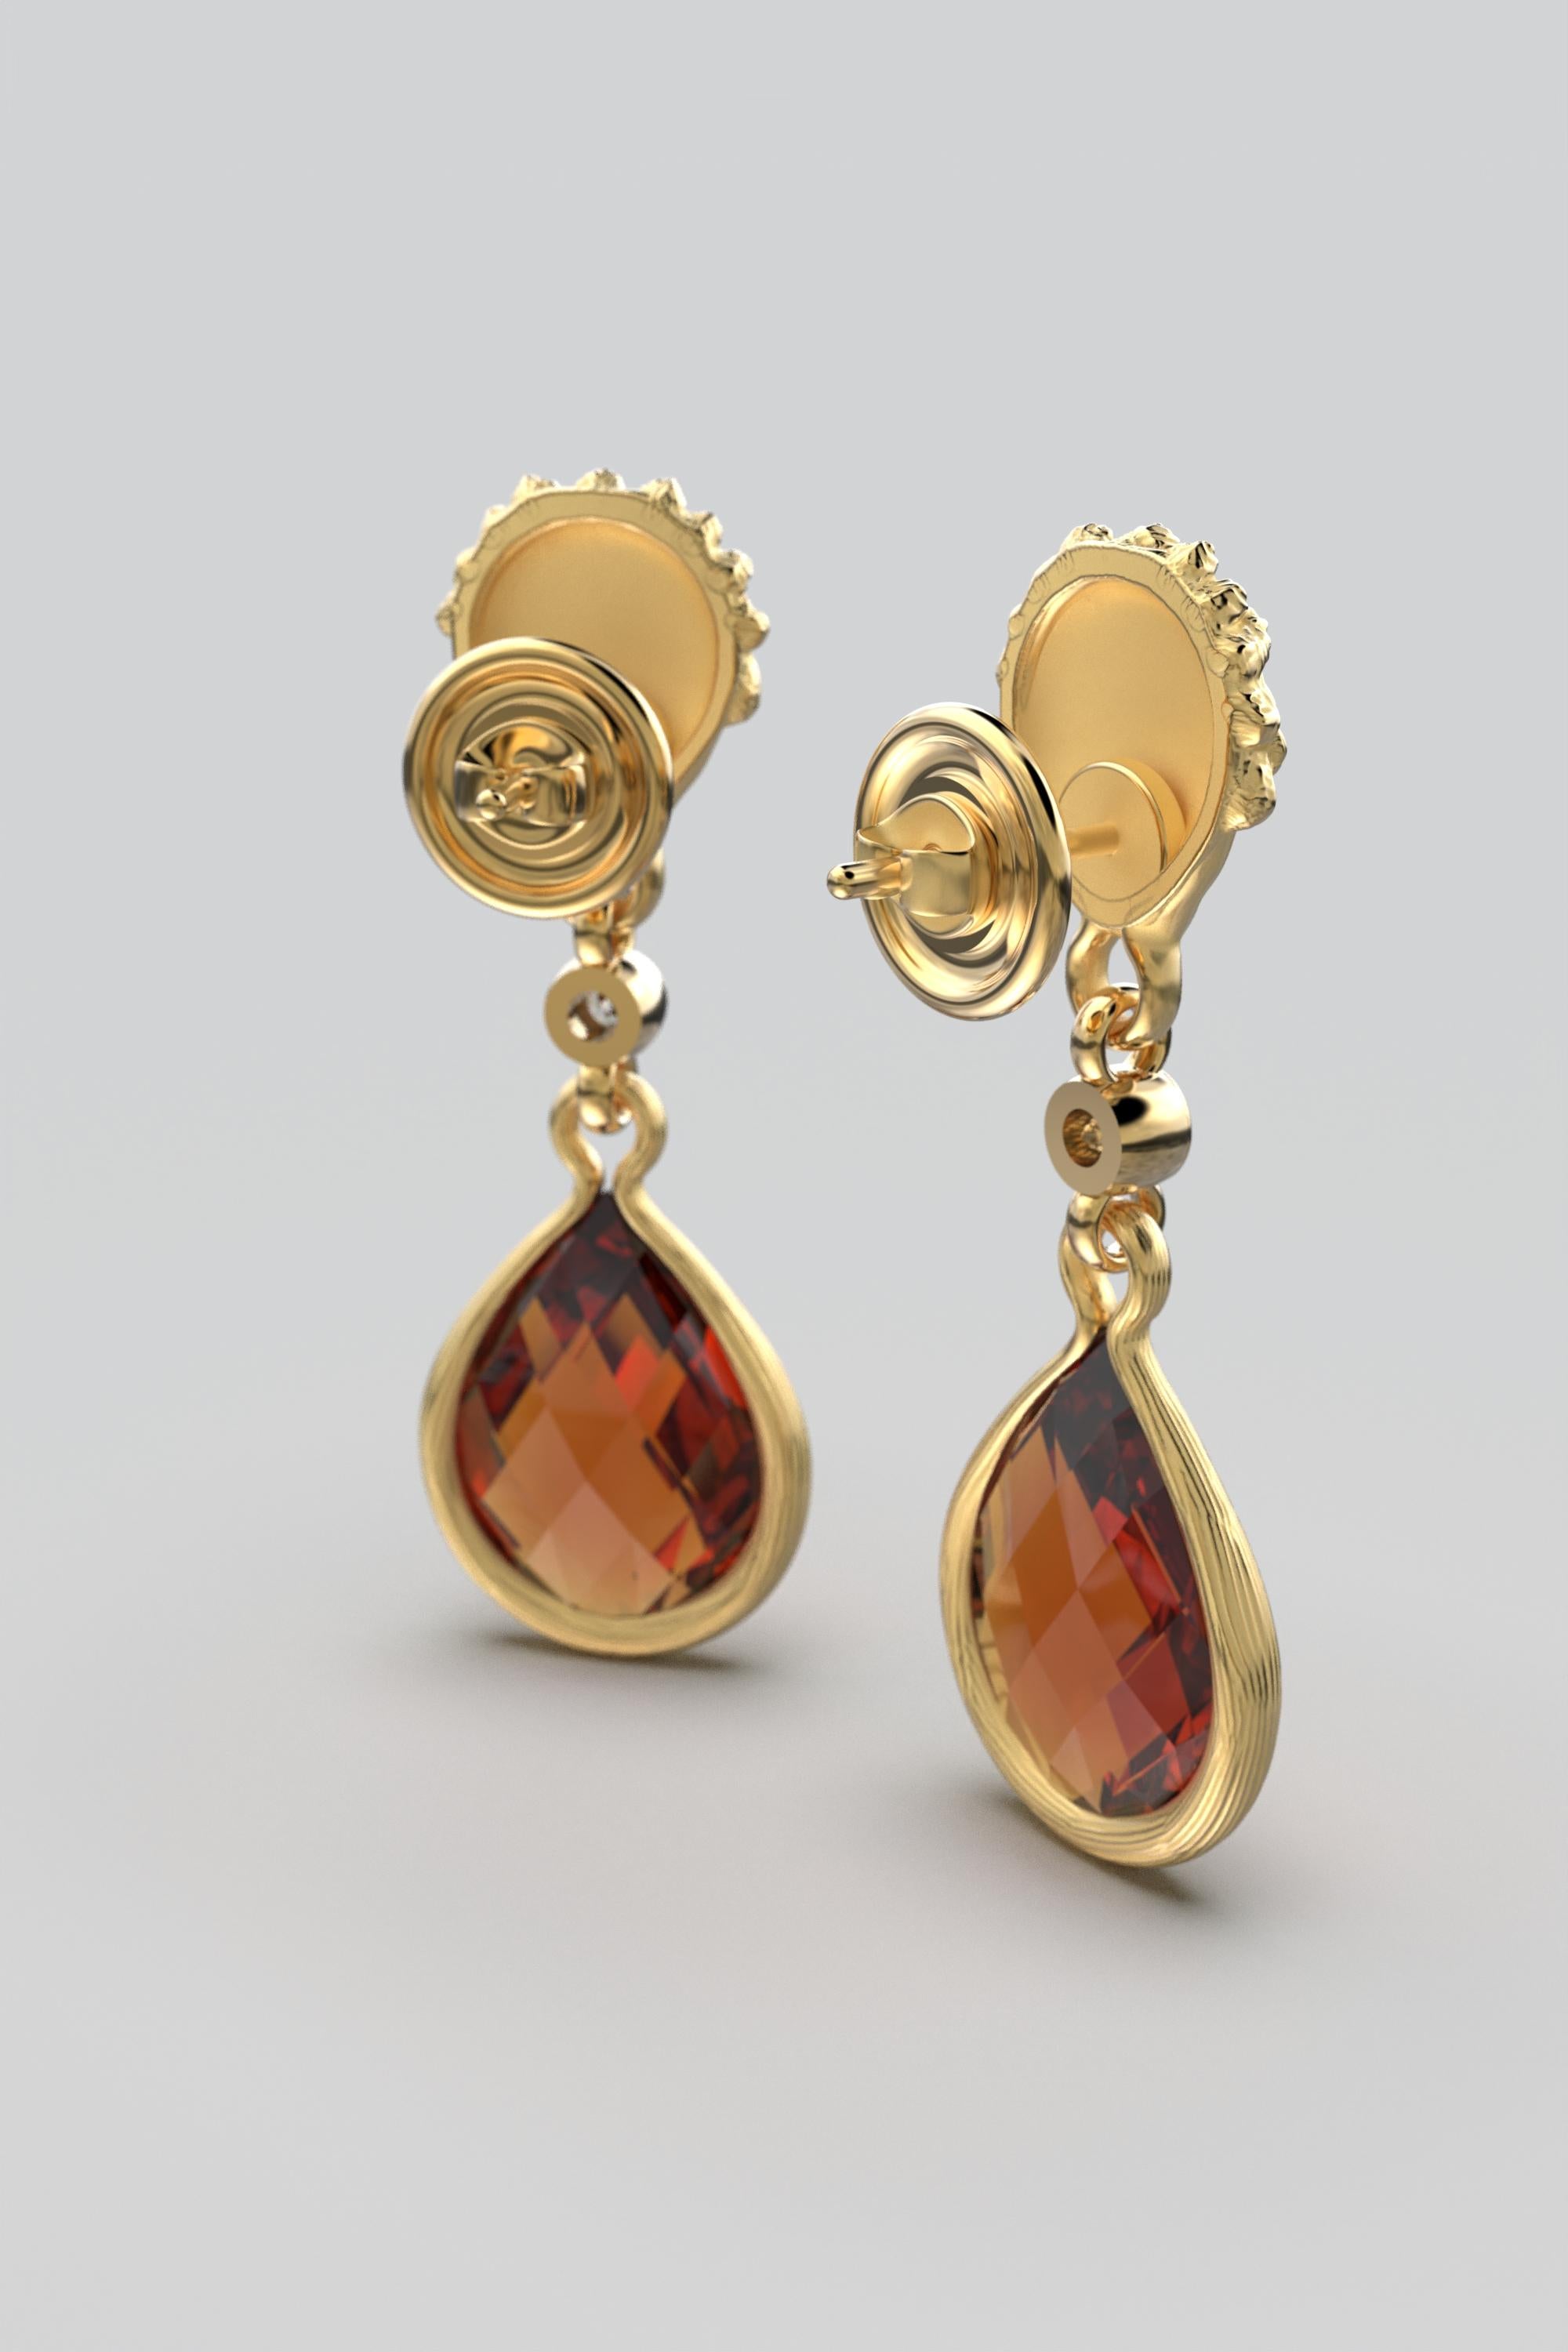 Classical Roman Oltremare Gioielli 14k Gold Madeira Citrine and Diamond Dangle Drop Earrings  For Sale